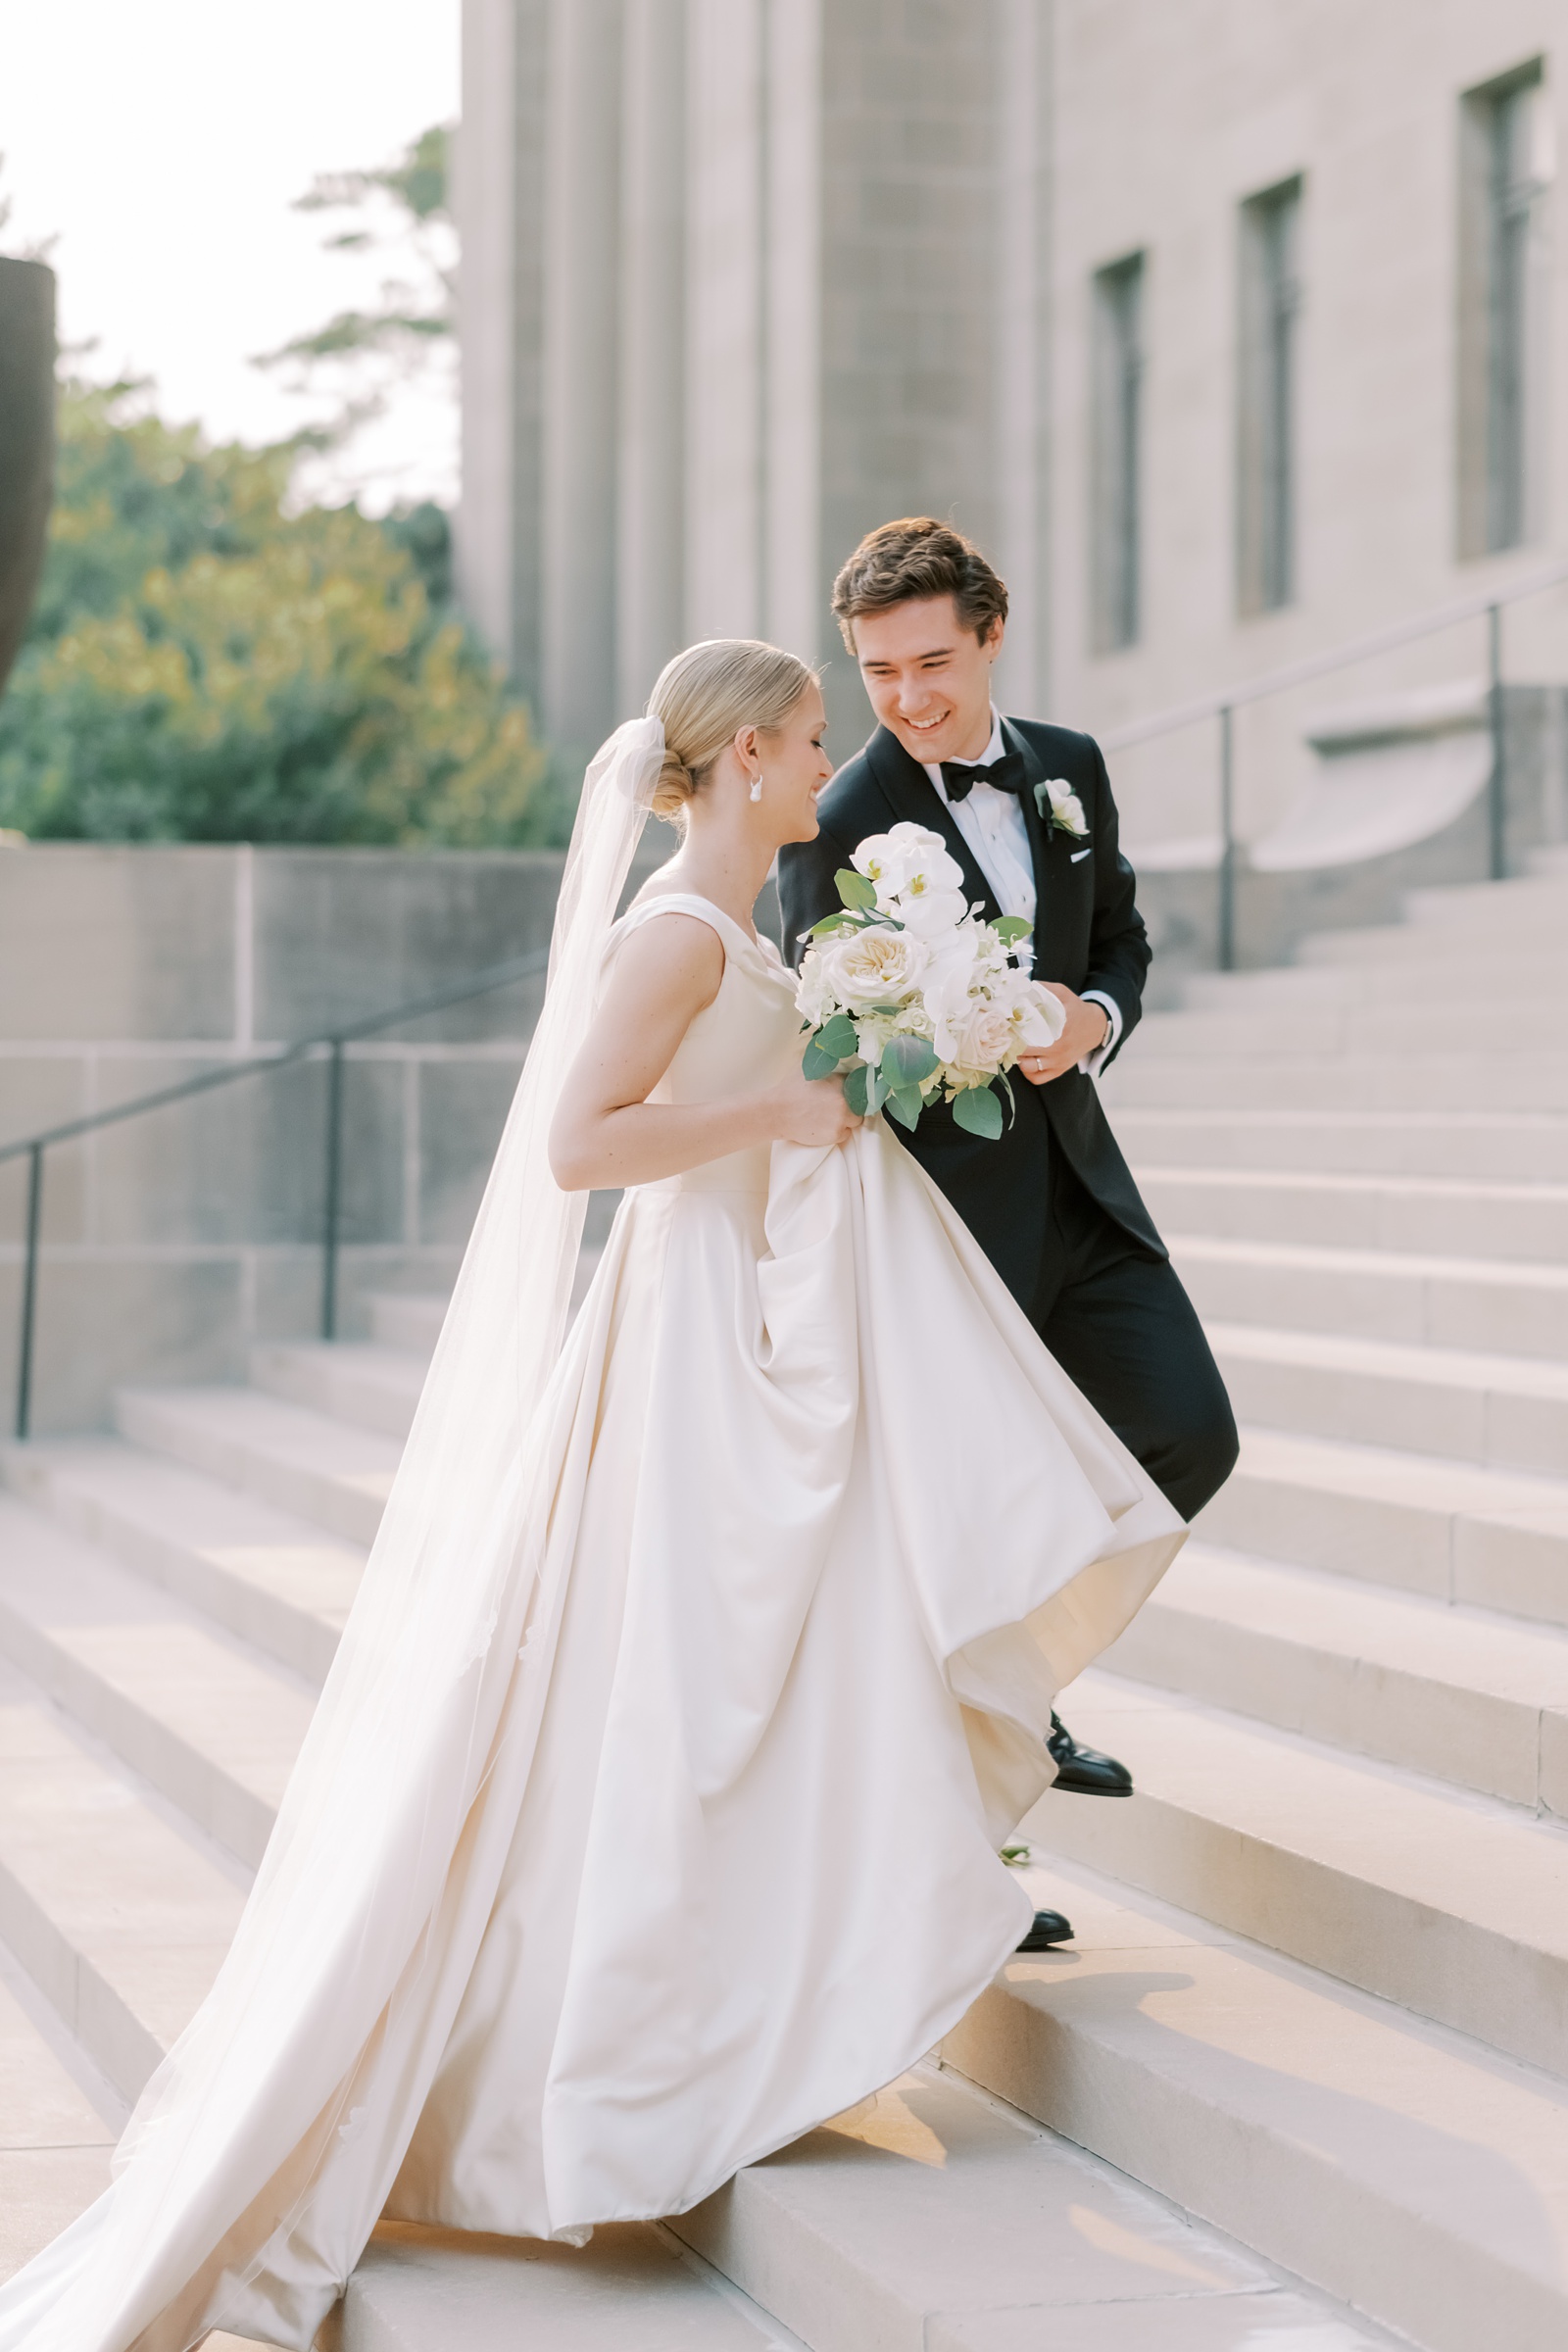 timeless European inspired wedding at the Nelson-Atkins Museum